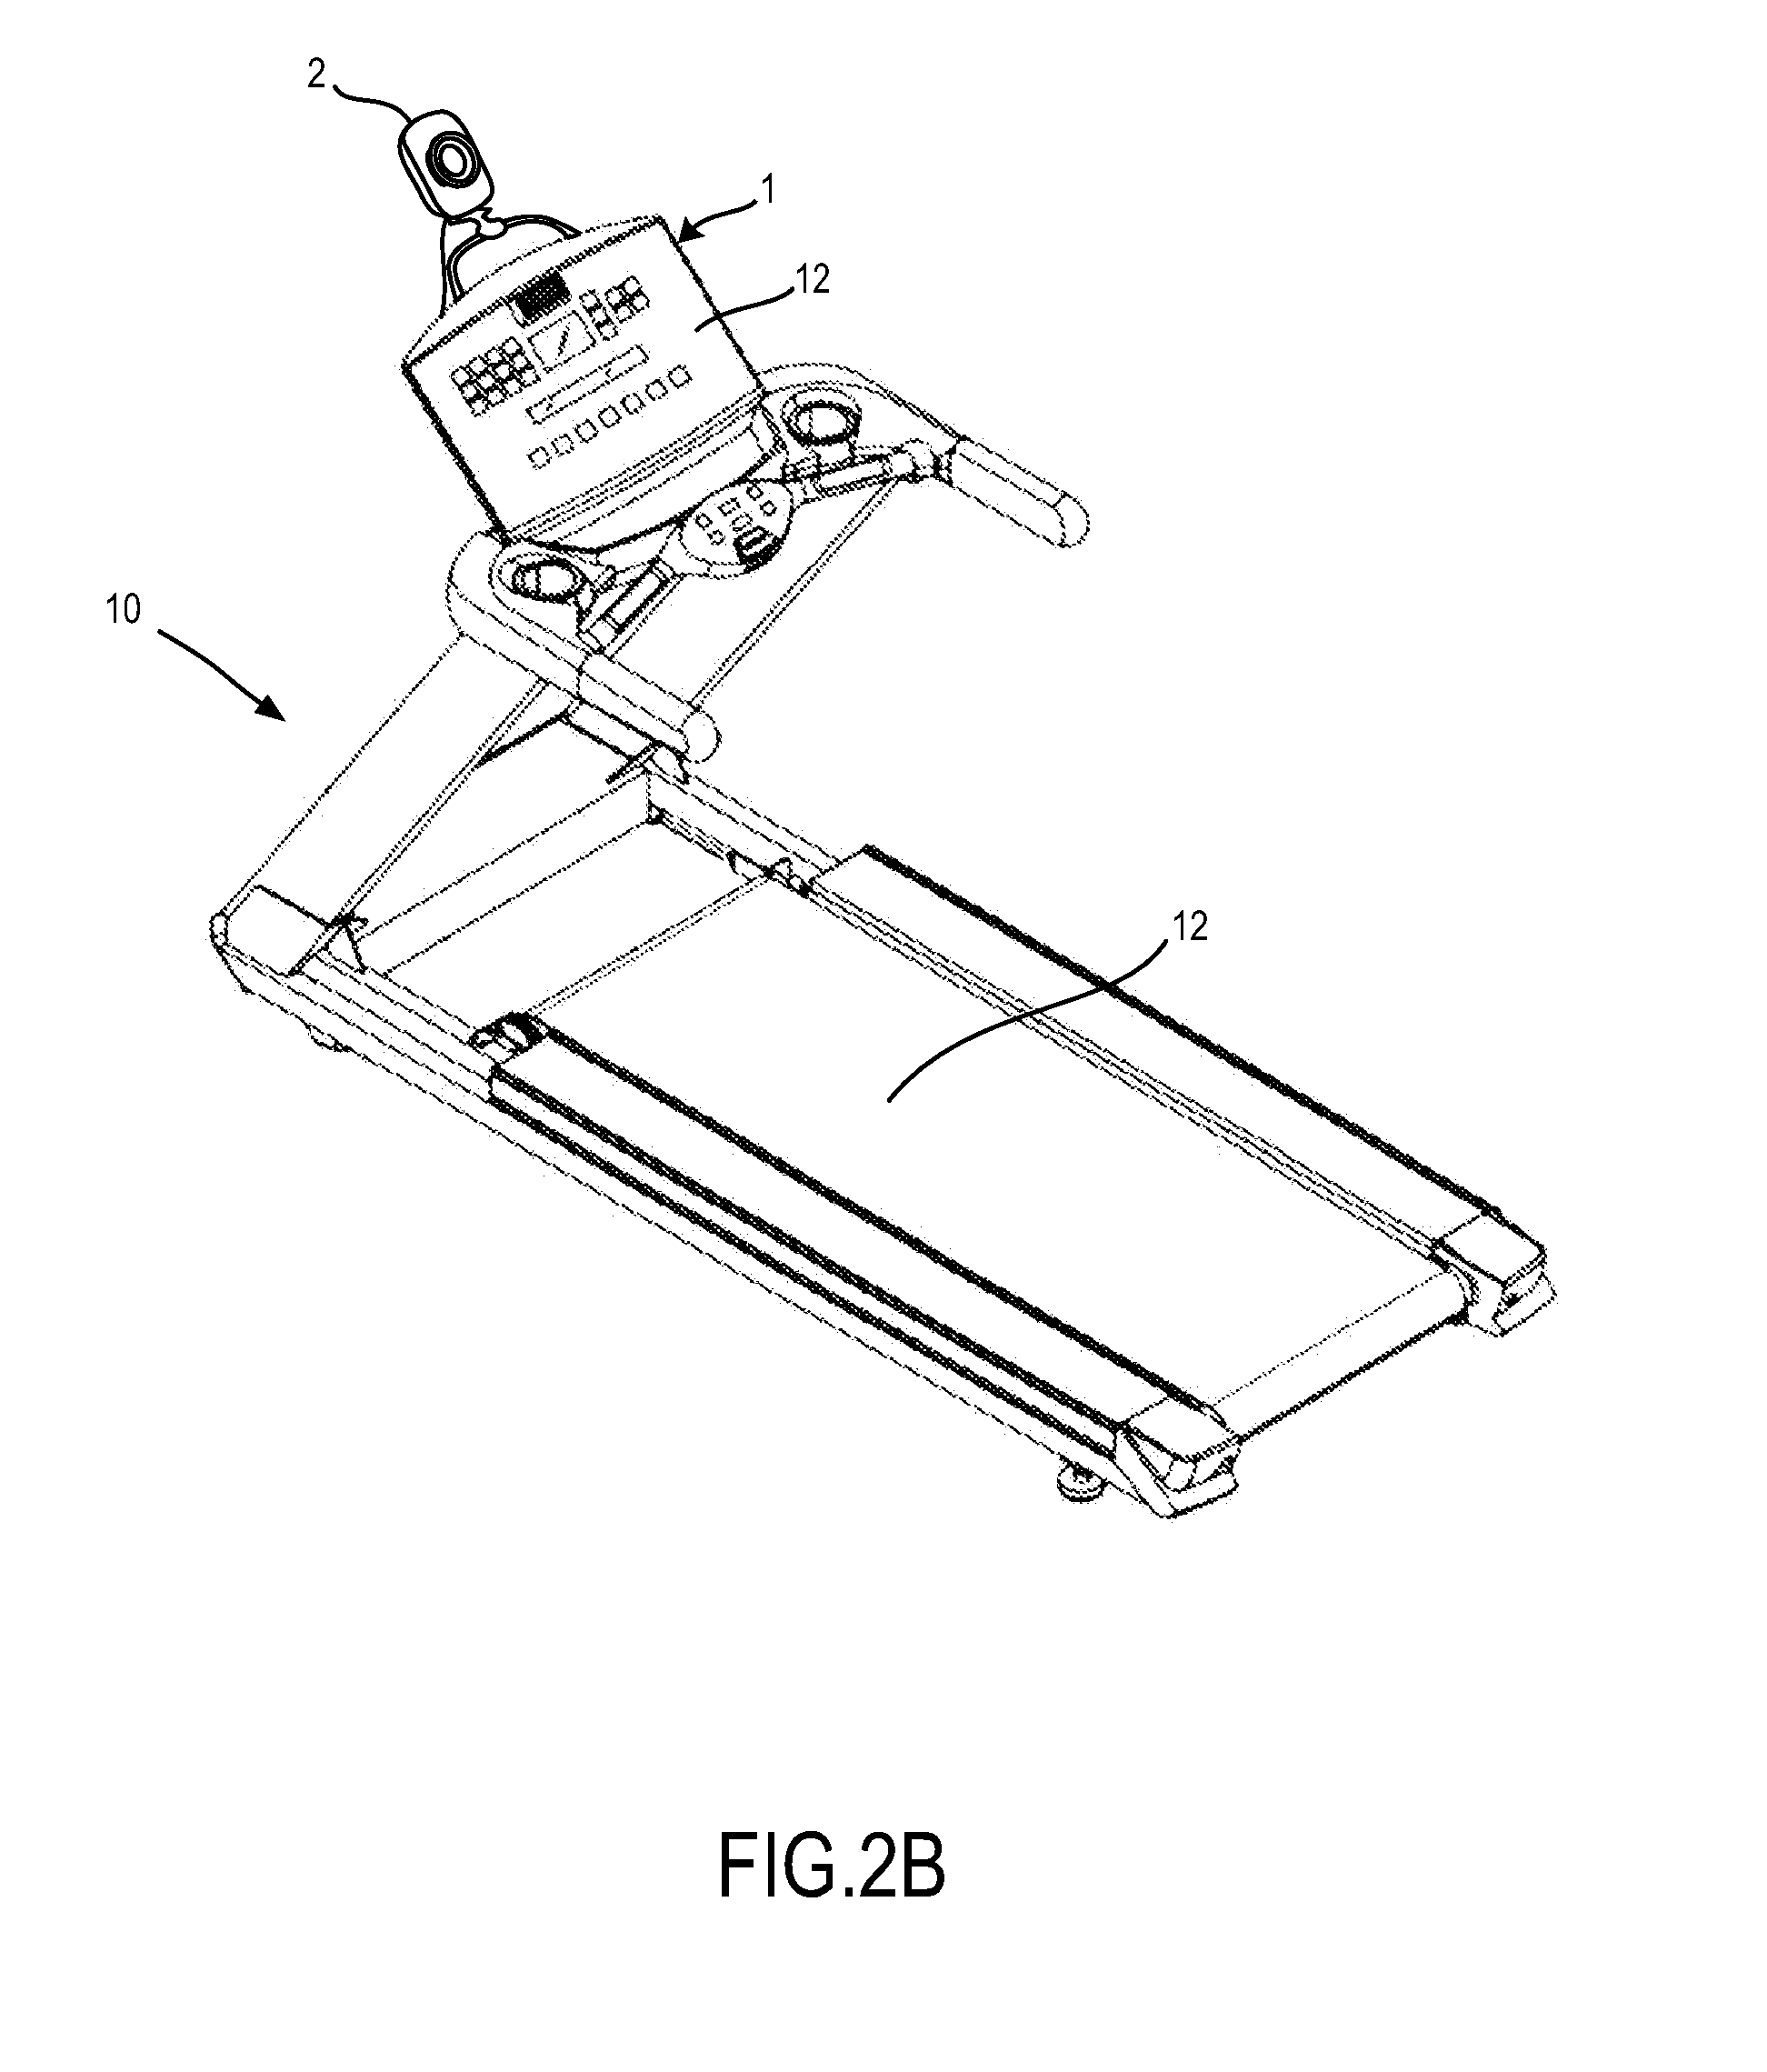 Device and method for monitoring vital signs